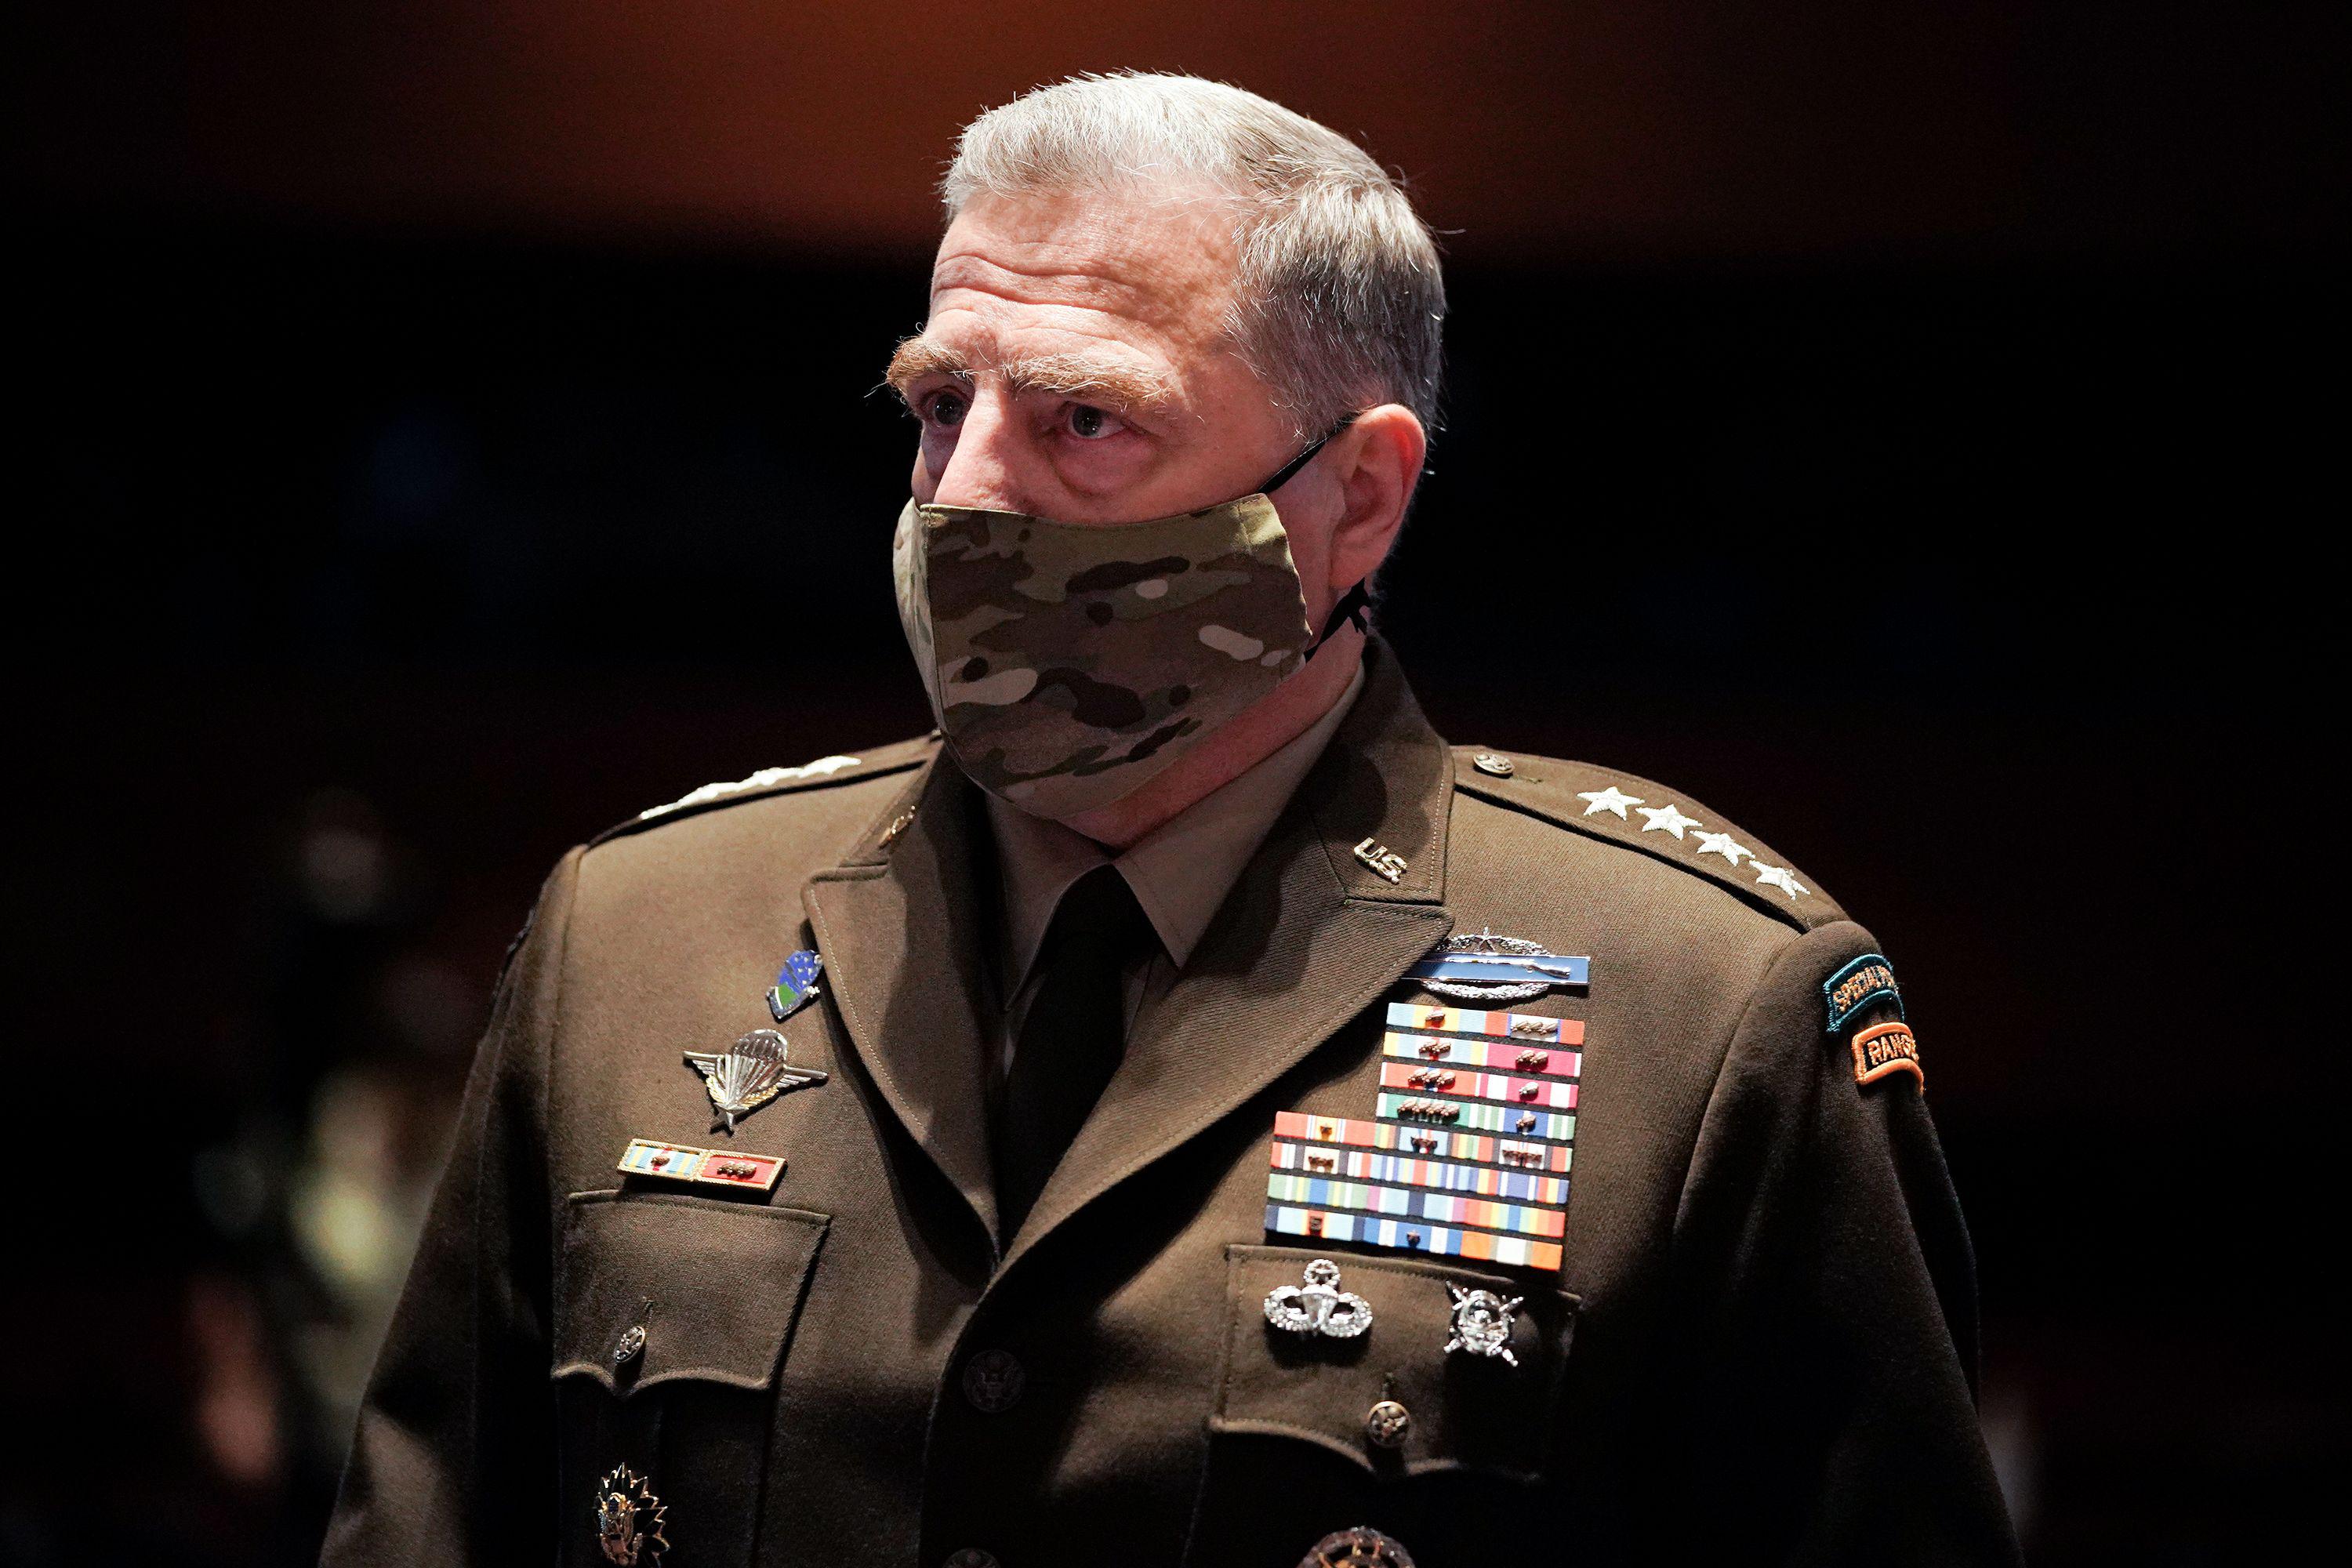 Milley wearing his uniform and a camo-patterned mask.